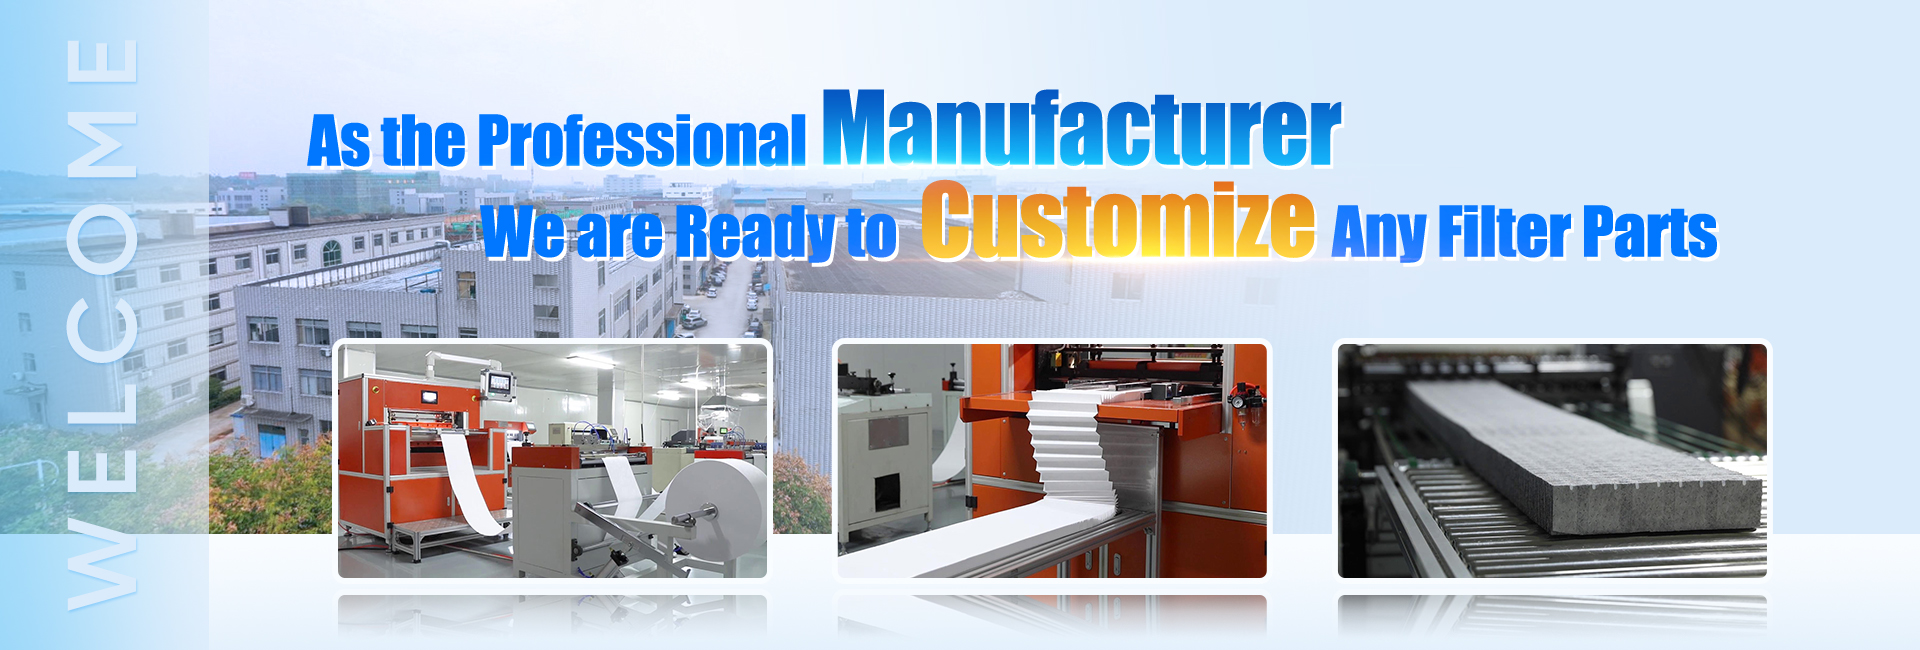 As the Professional Manufacturer we are Ready to Customize Any Filter Parts